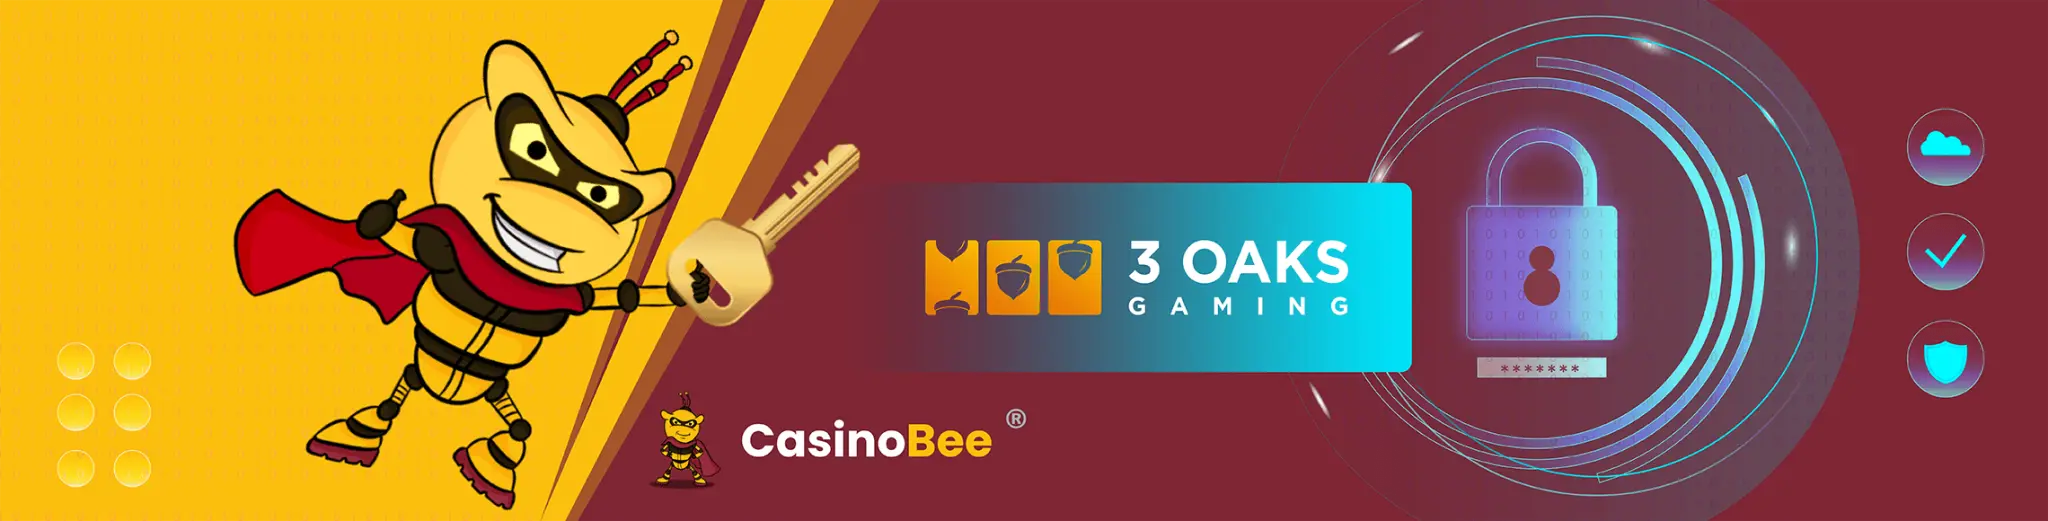 Play Safely and Securely at 3 Oaks Gaming Casinos